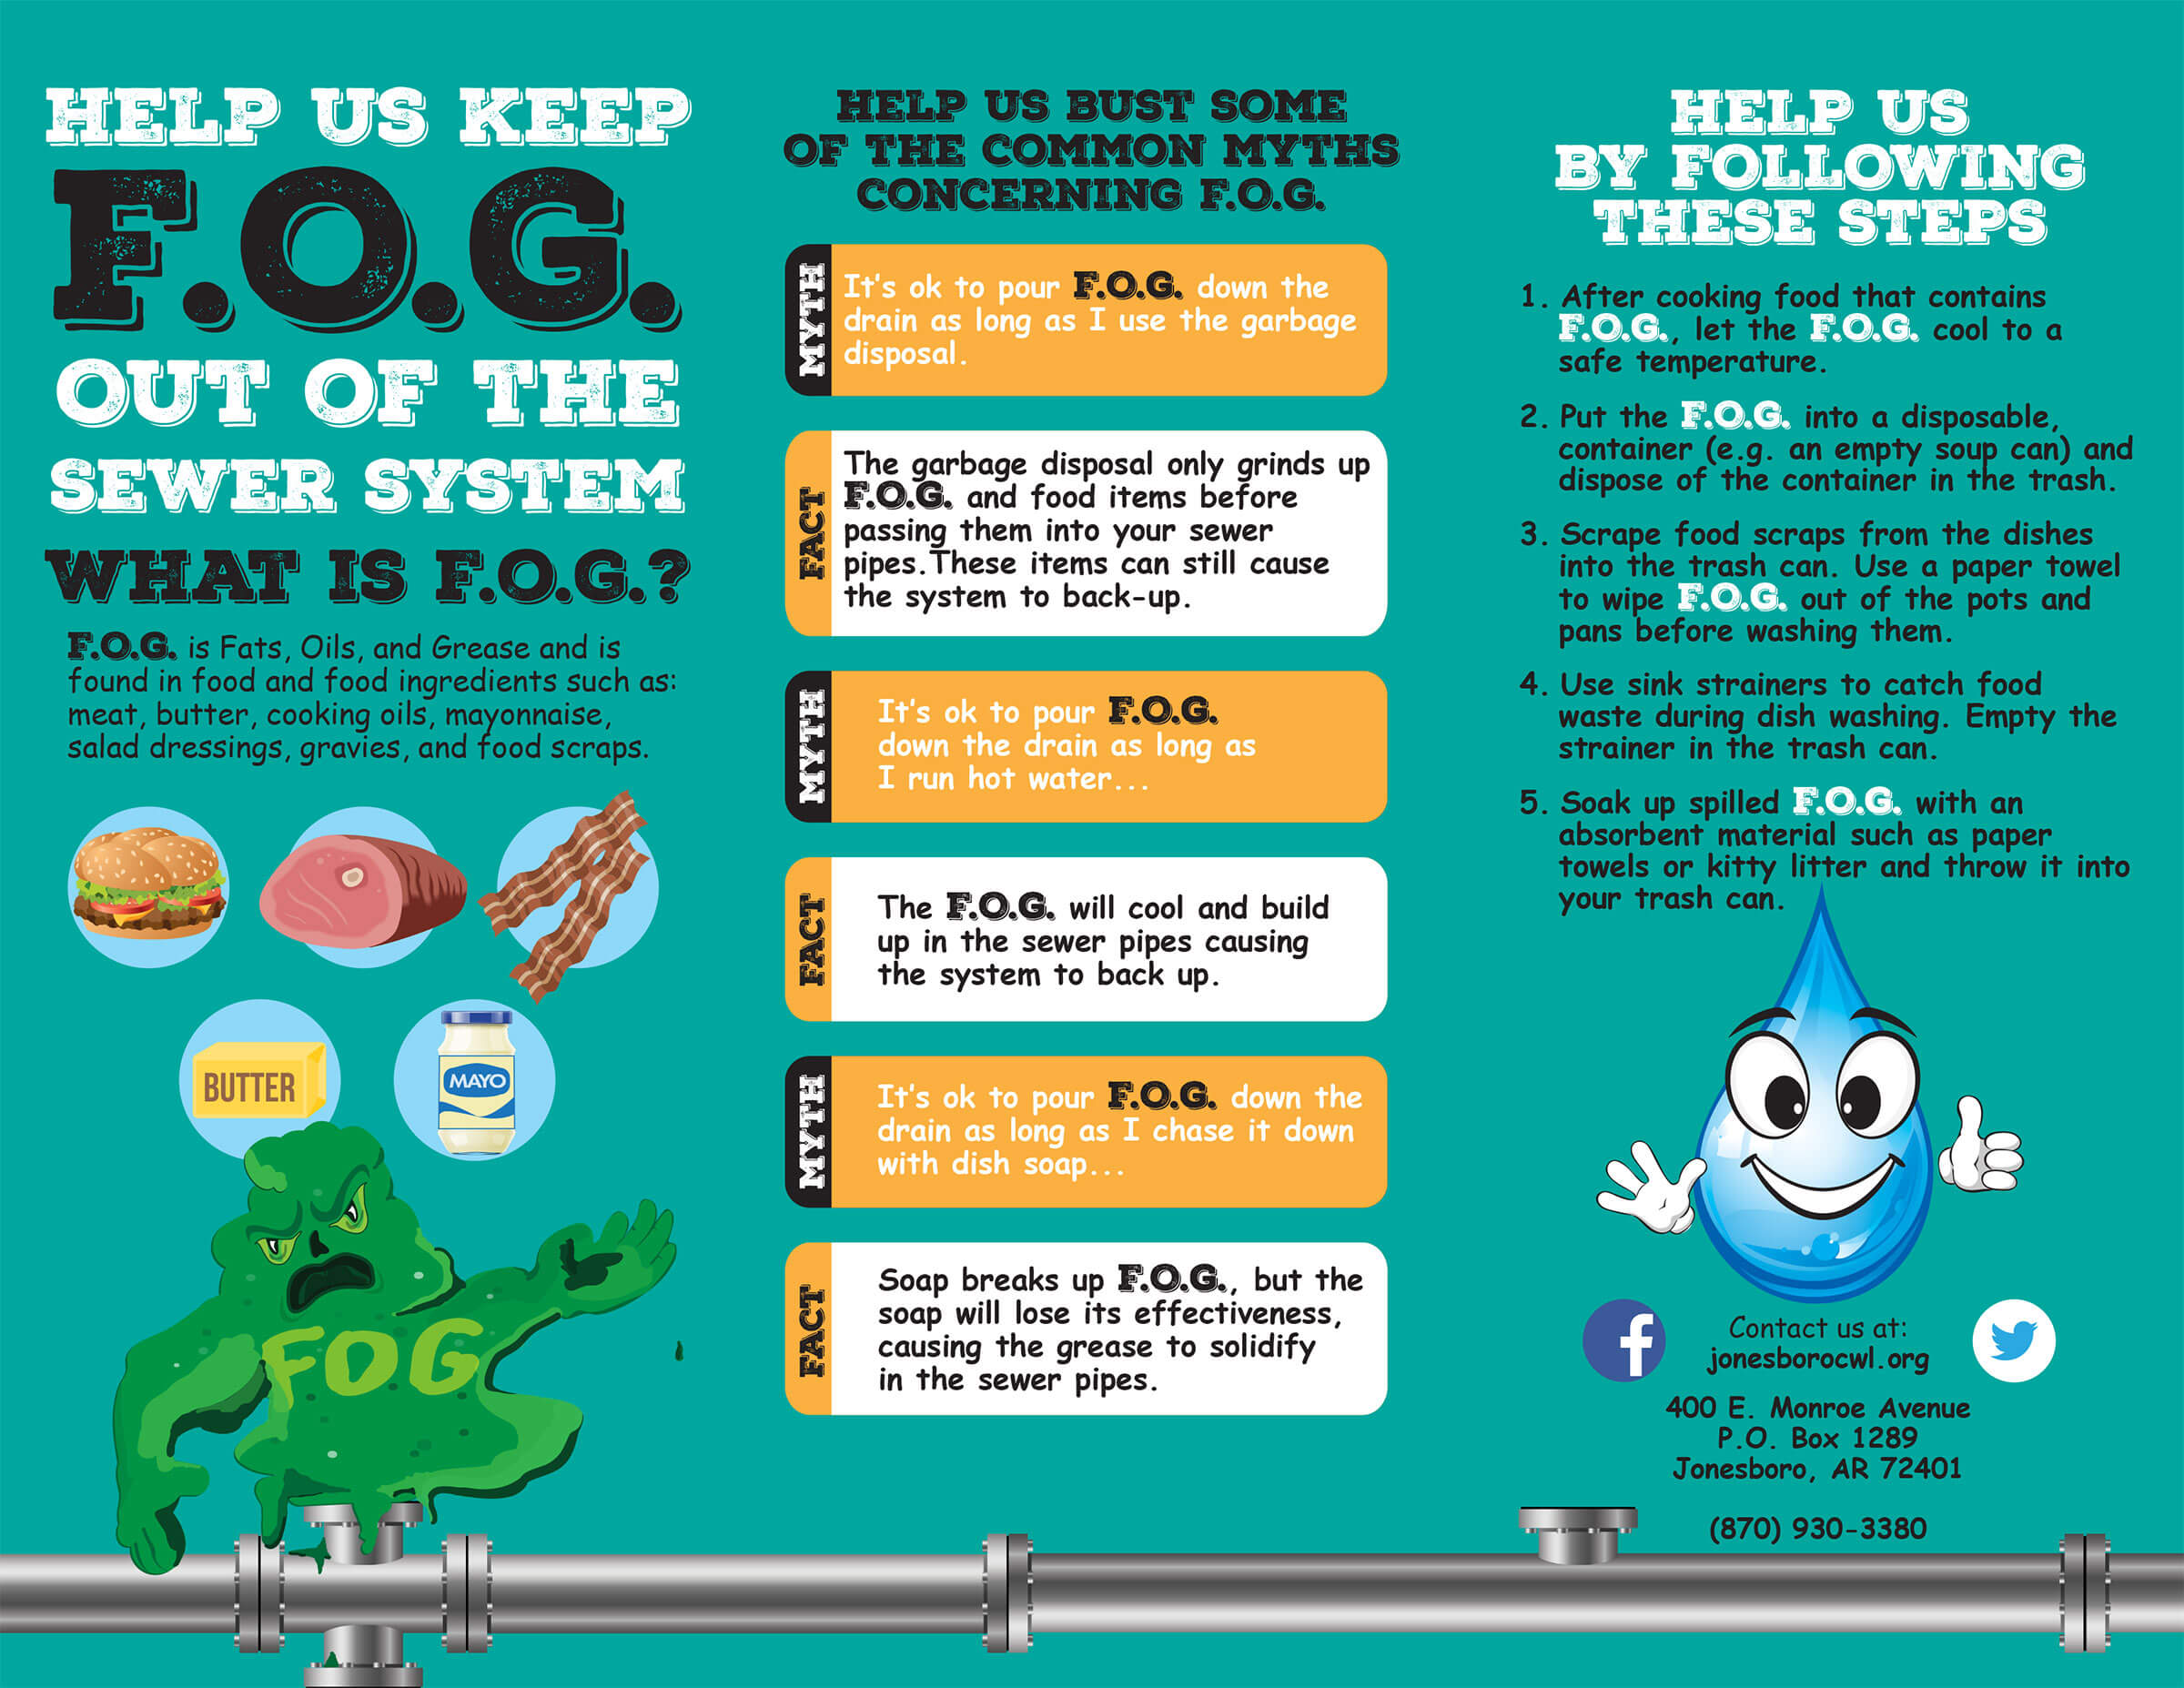 Help us keep F.O.G out of the Sewer System